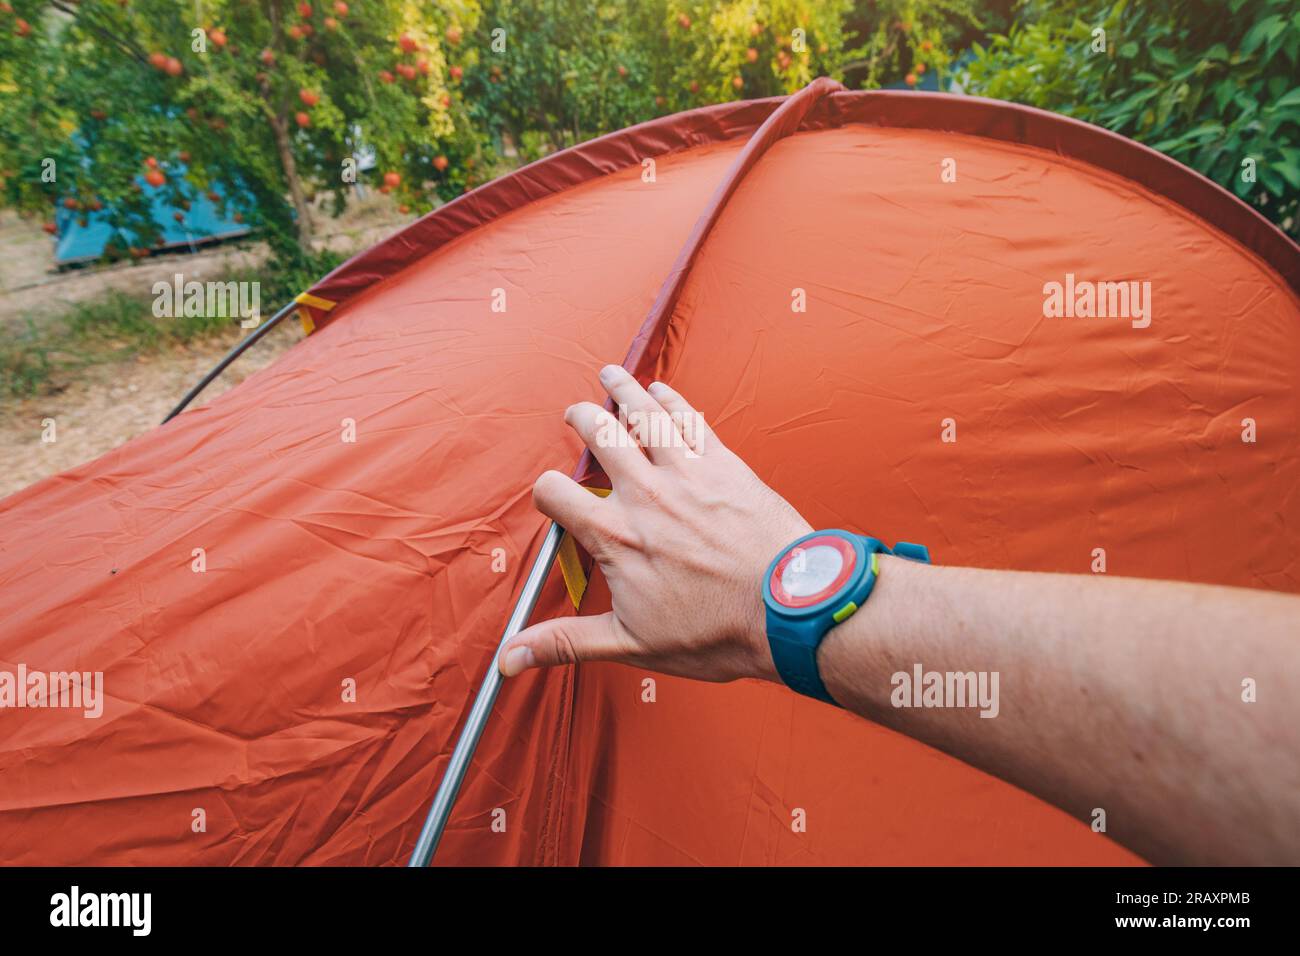 Assembling and installing a tent in a camping. Equipment and materials for hiking Stock Photo